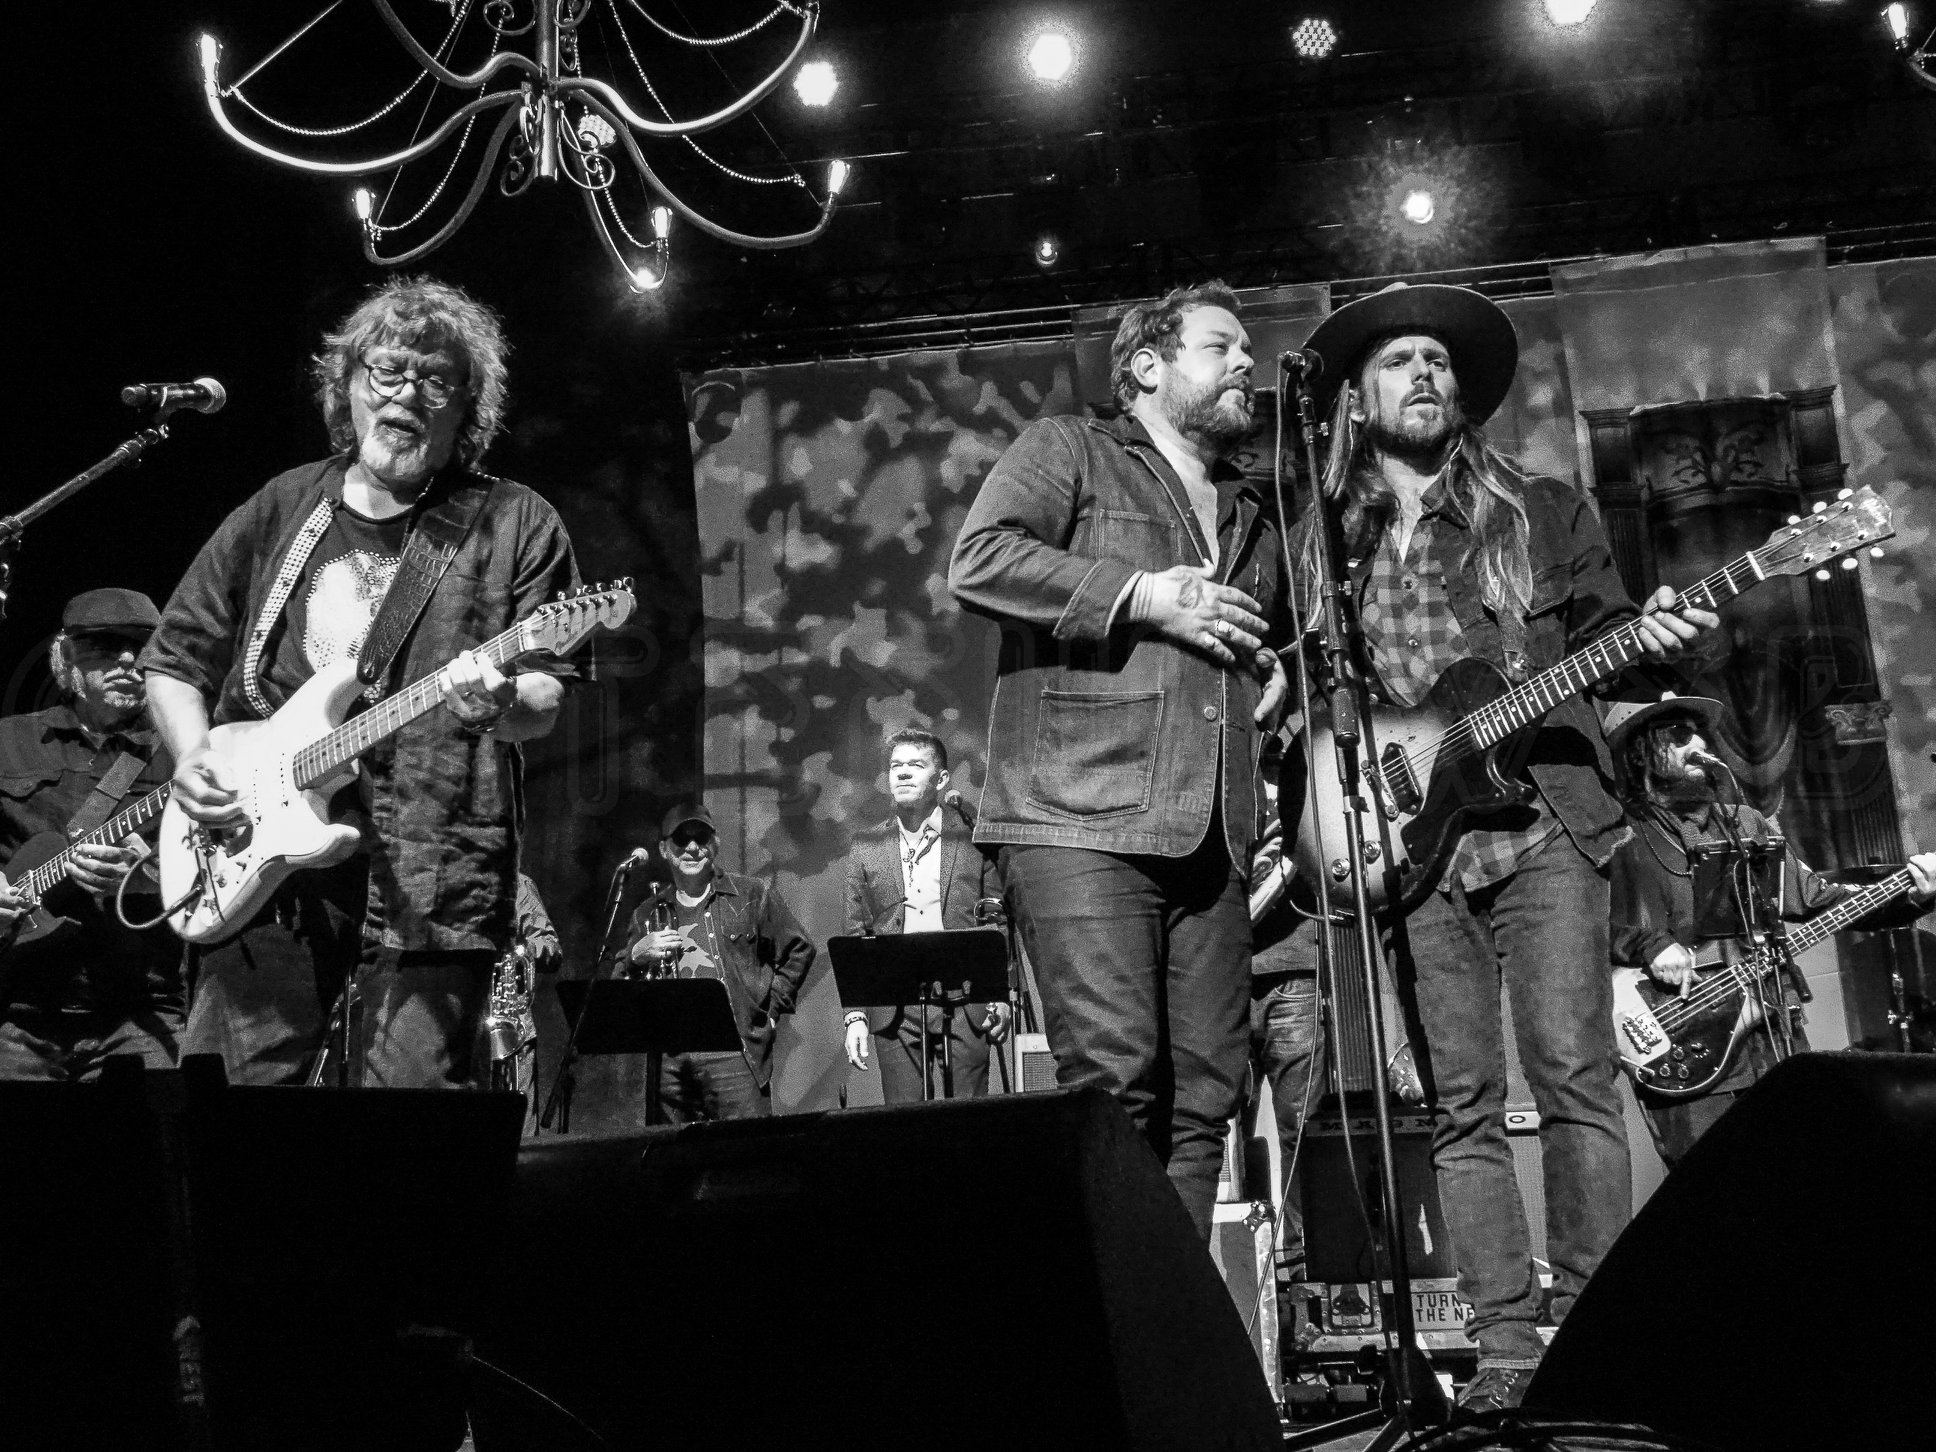 Dave Malone, Nathaniel Rateliff, and Lukas Nelson